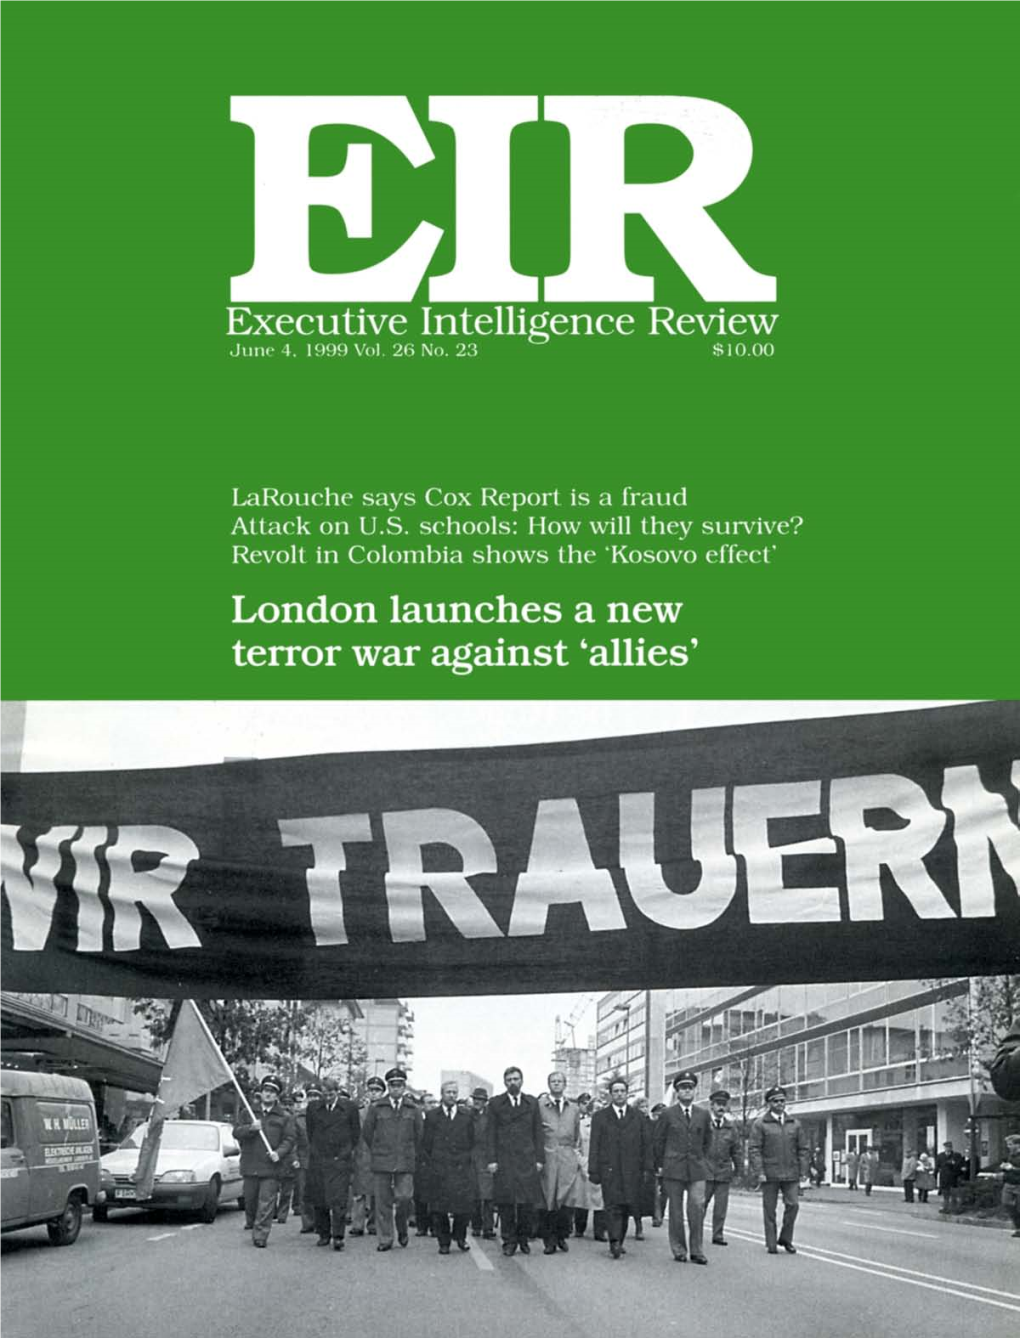 Executive Intelligence Review, Volume 26, Number 23, June 4, 1999